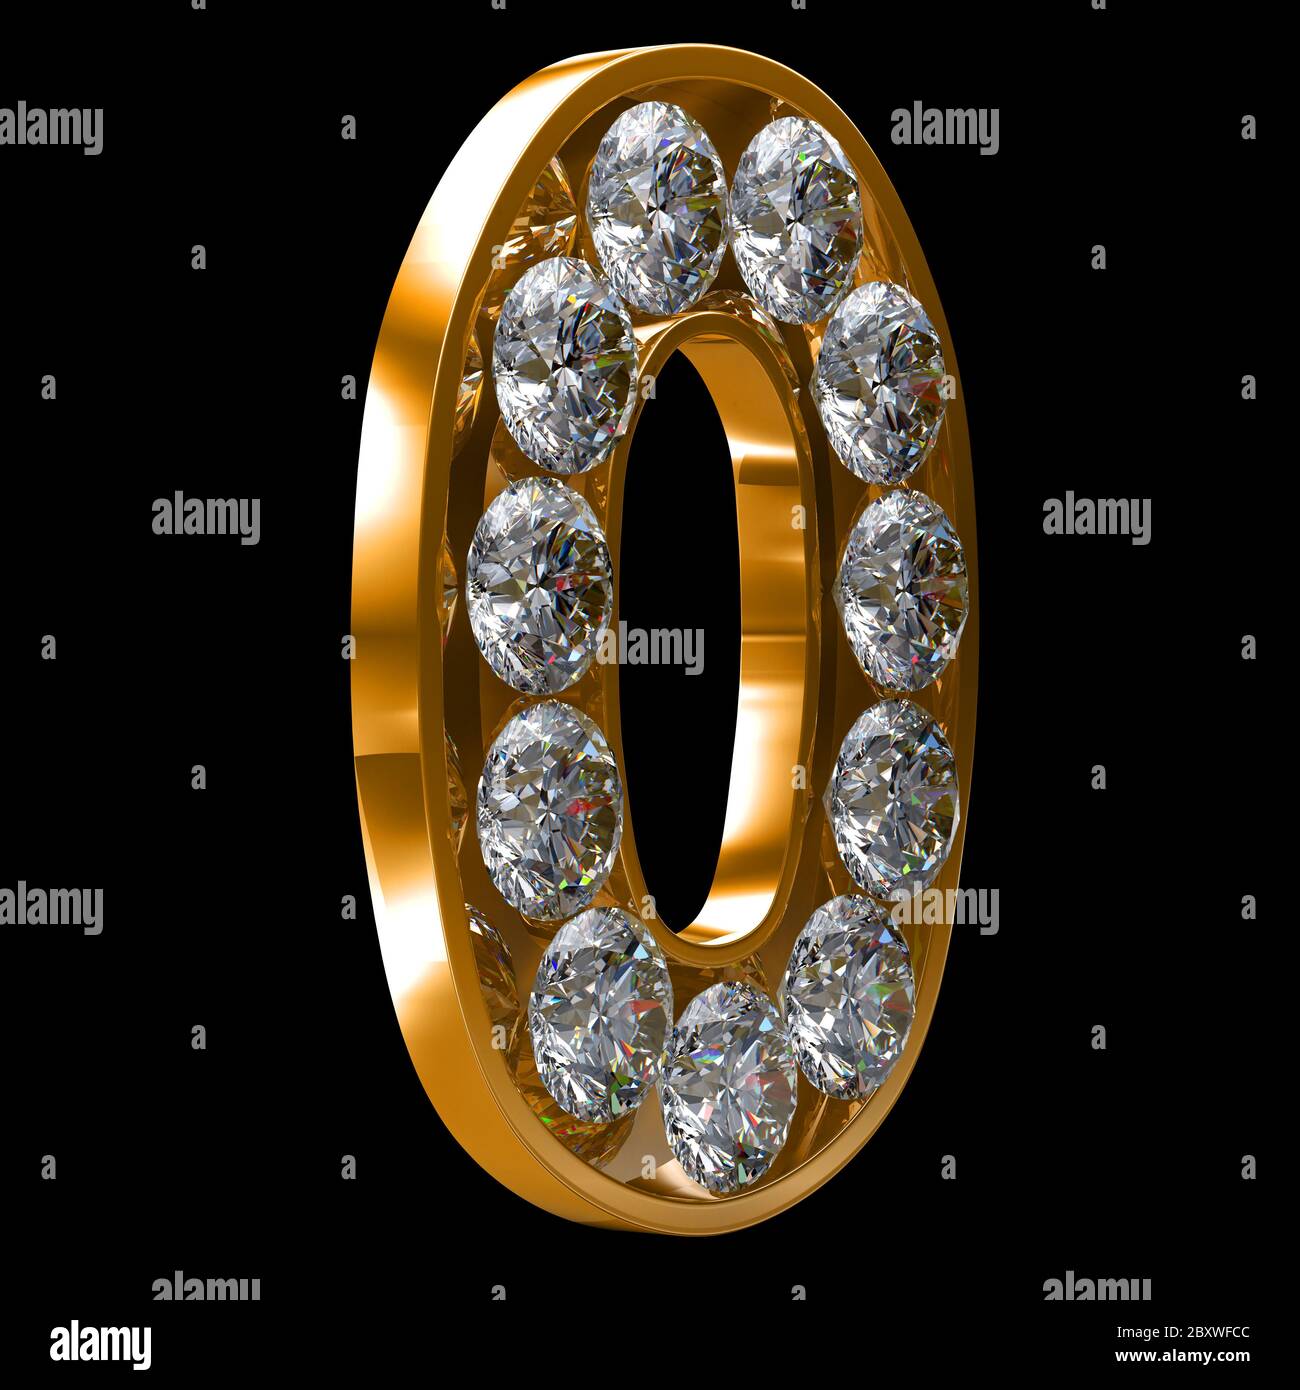 Golden 0 numeral incrusted with diamonds Stock Photo